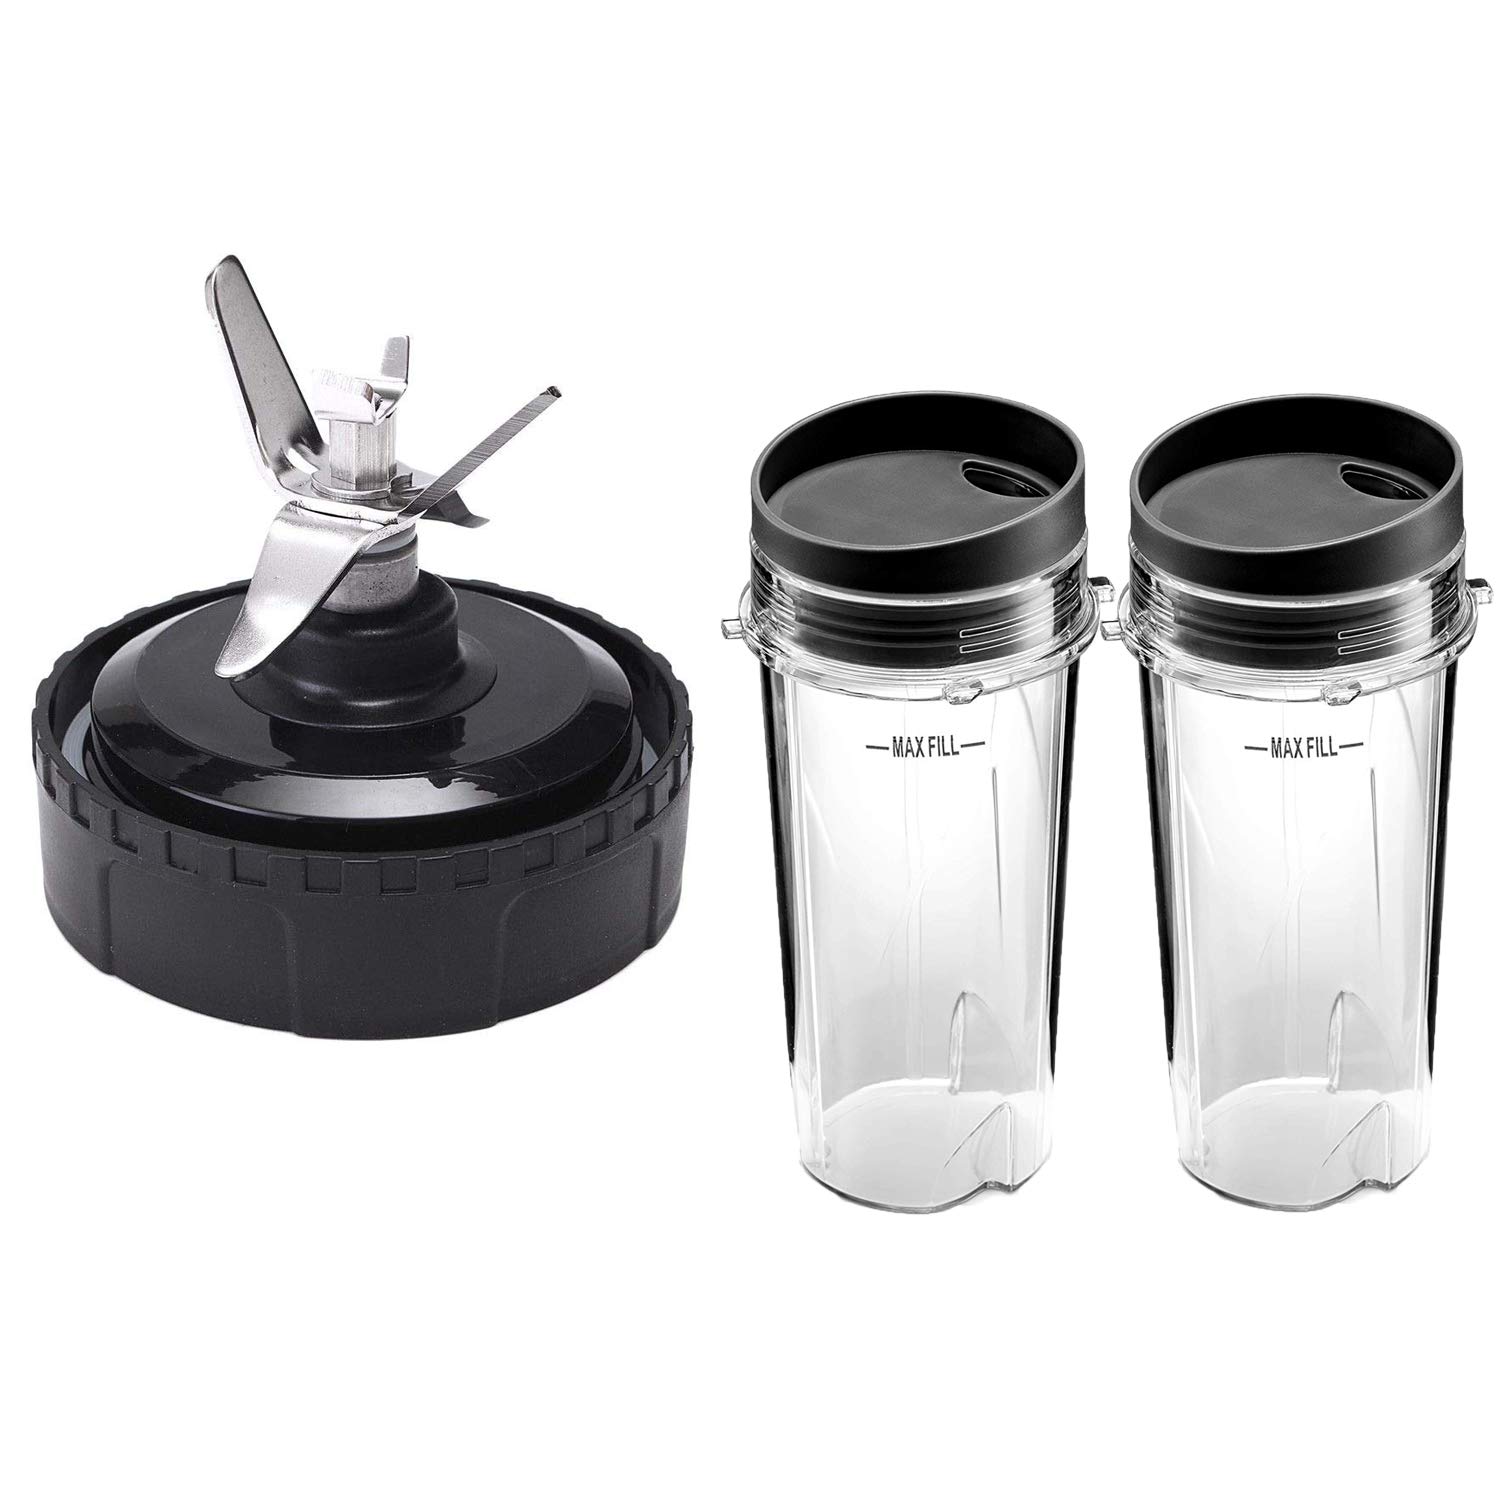 Ninja Blender Replacement 72 oz 9 Cup Pitcher with Blade and Lid (Square)